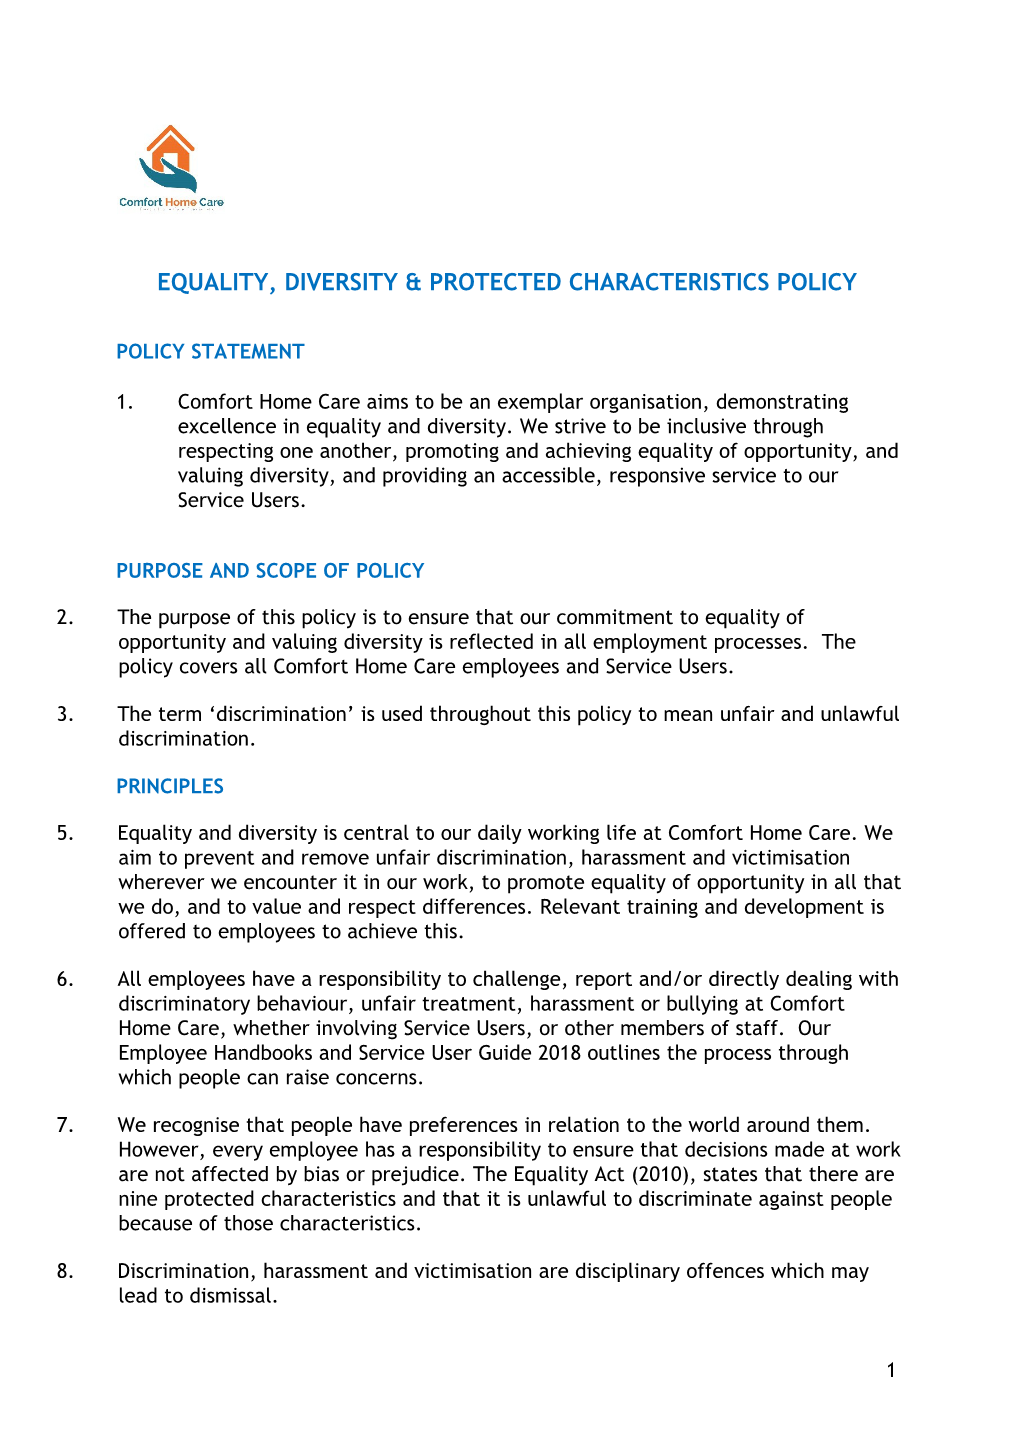 20140812 Equality & Diversity Policy